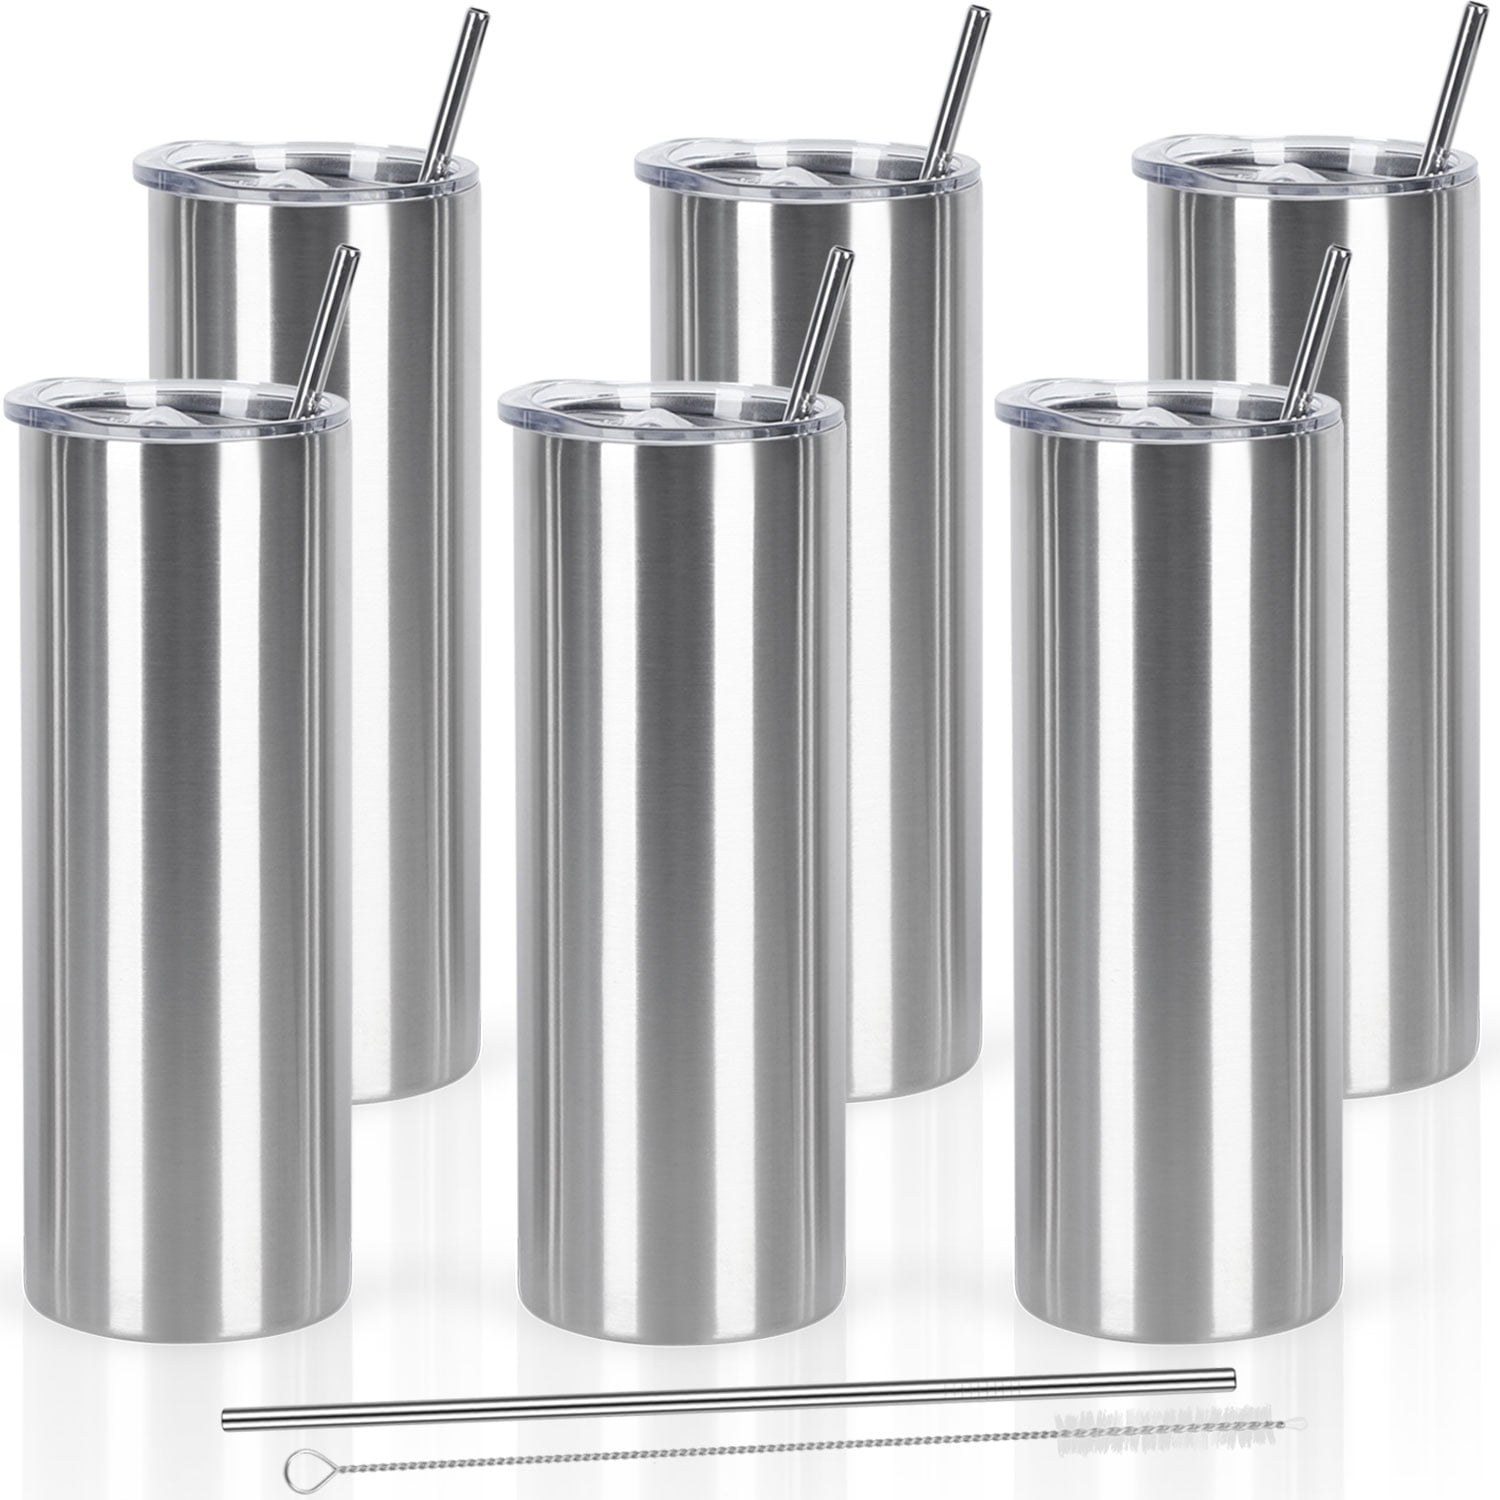 30 oz. BOSS Double Wall Stainless Steel Tumblers Wholesale